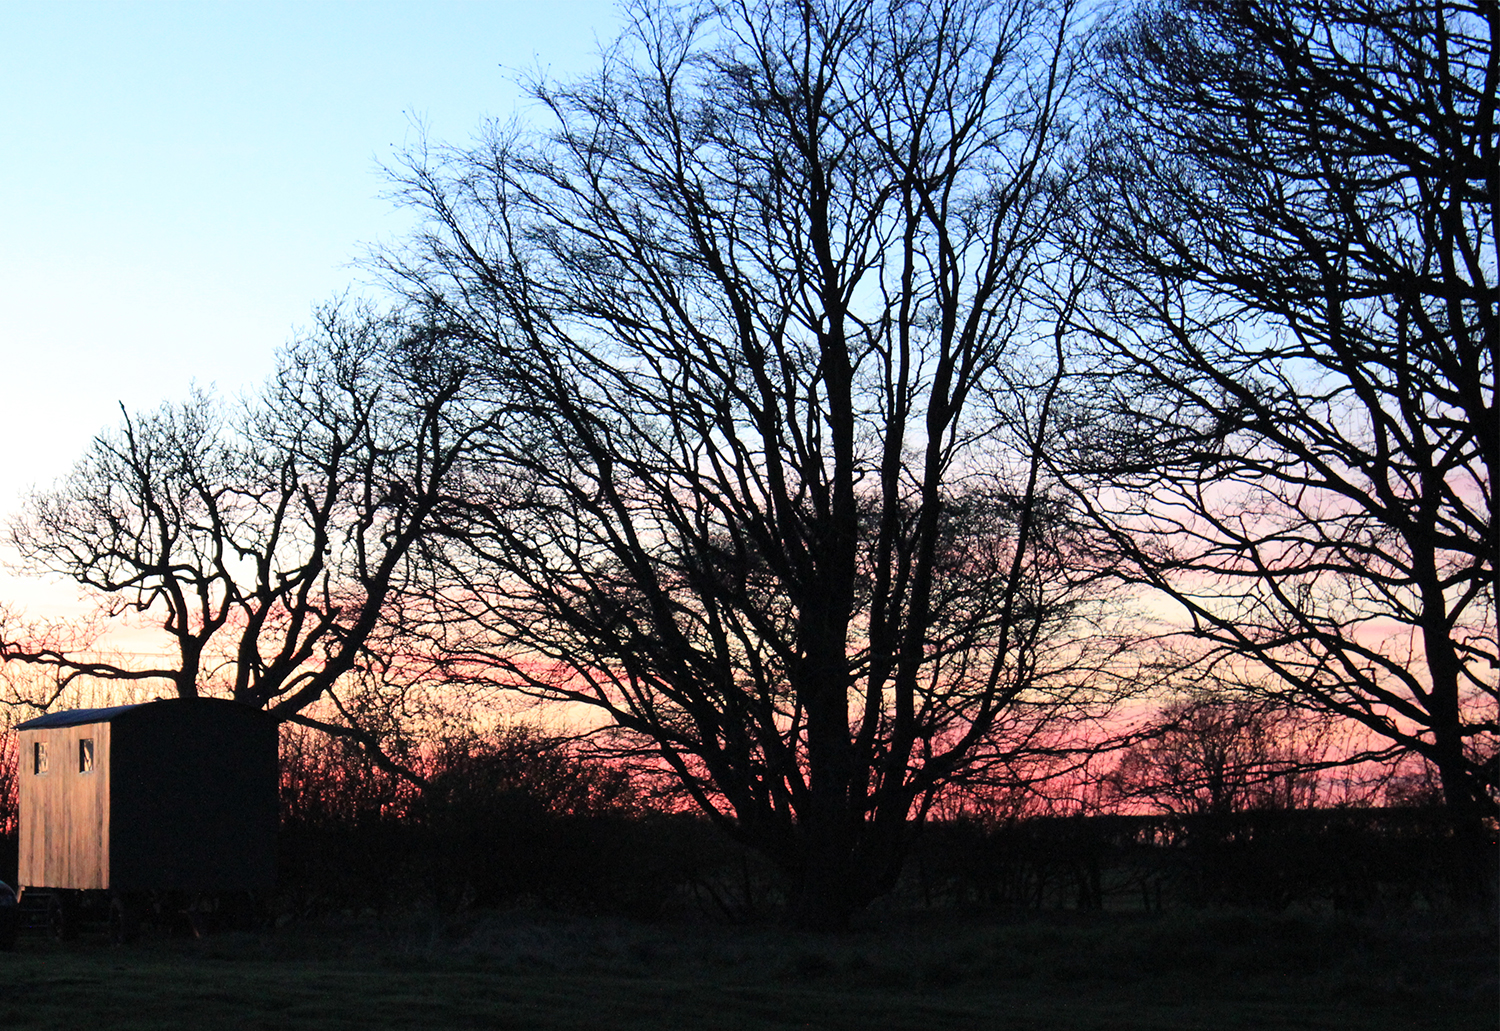 The sun setting through the trees at Thorpe Glamping